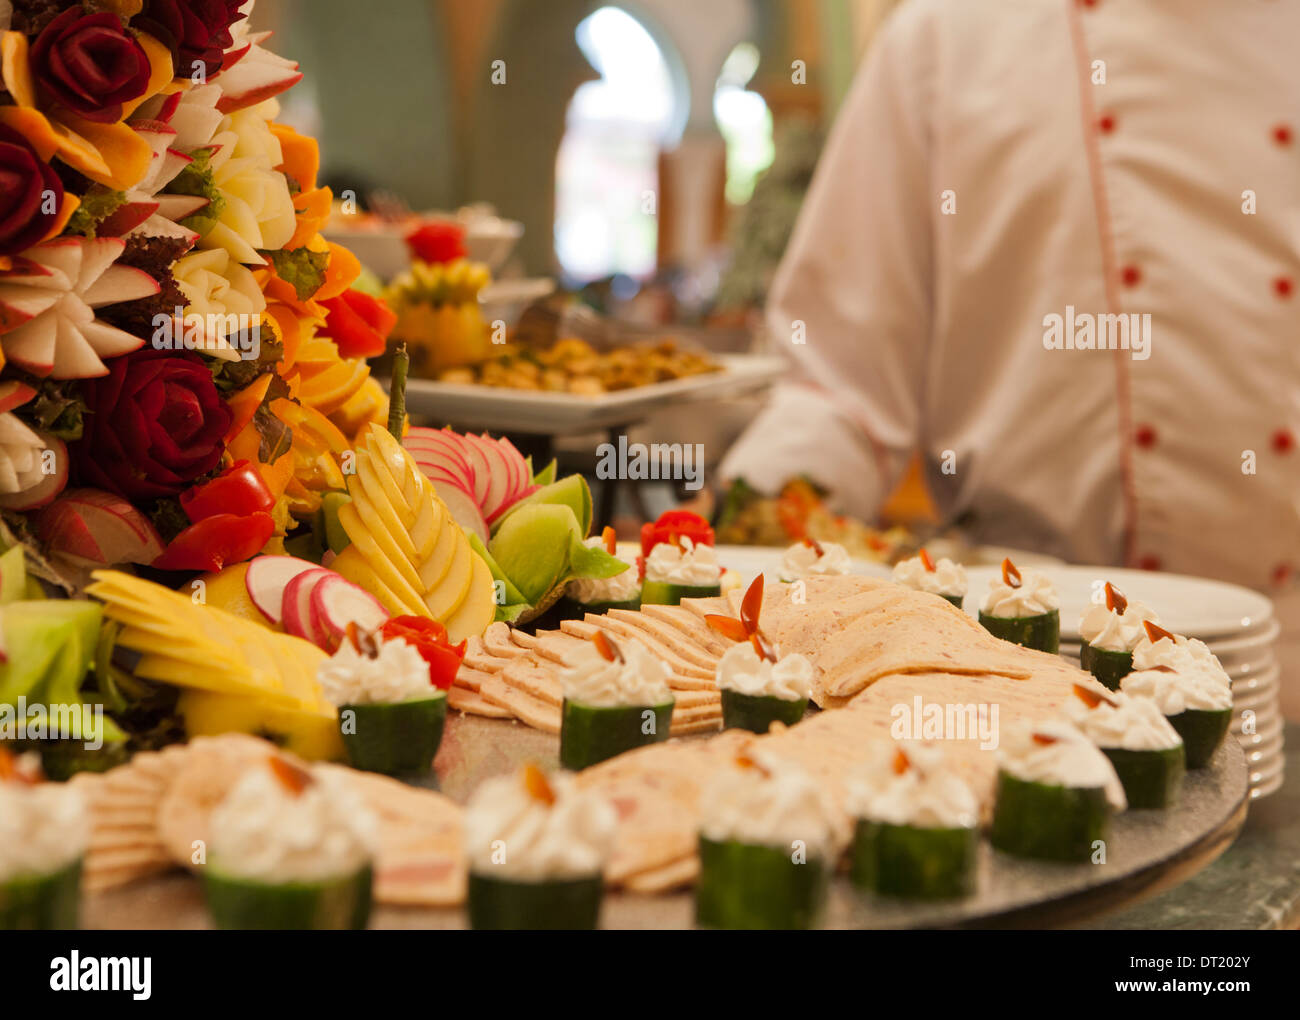 Shallow focus image of a chef attending to buffet Stock Photo